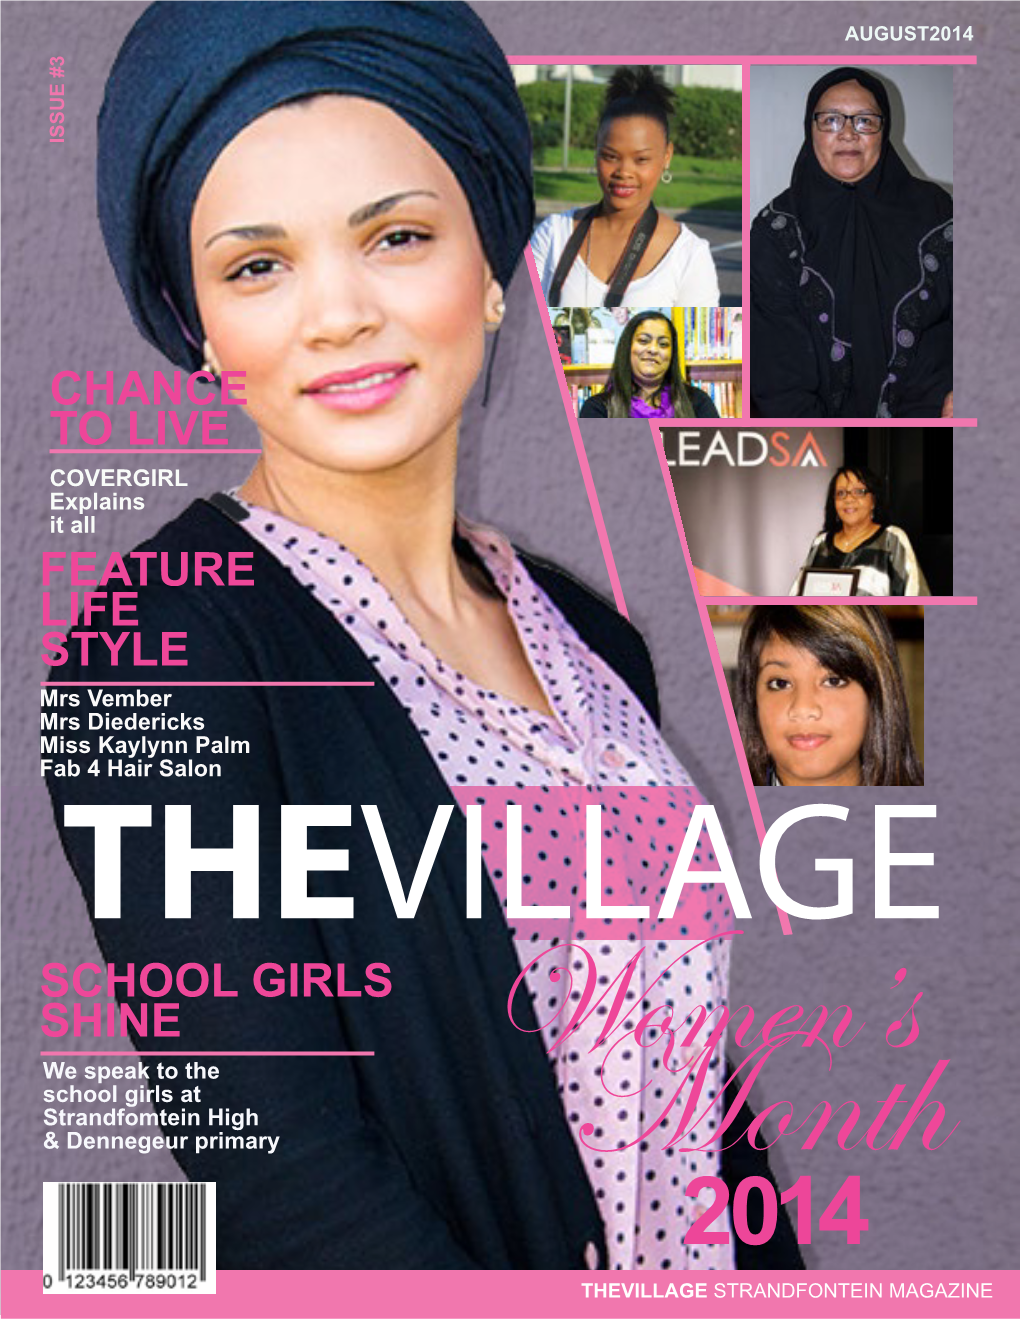 School Girls Shine Feature Life Style Chance to Live